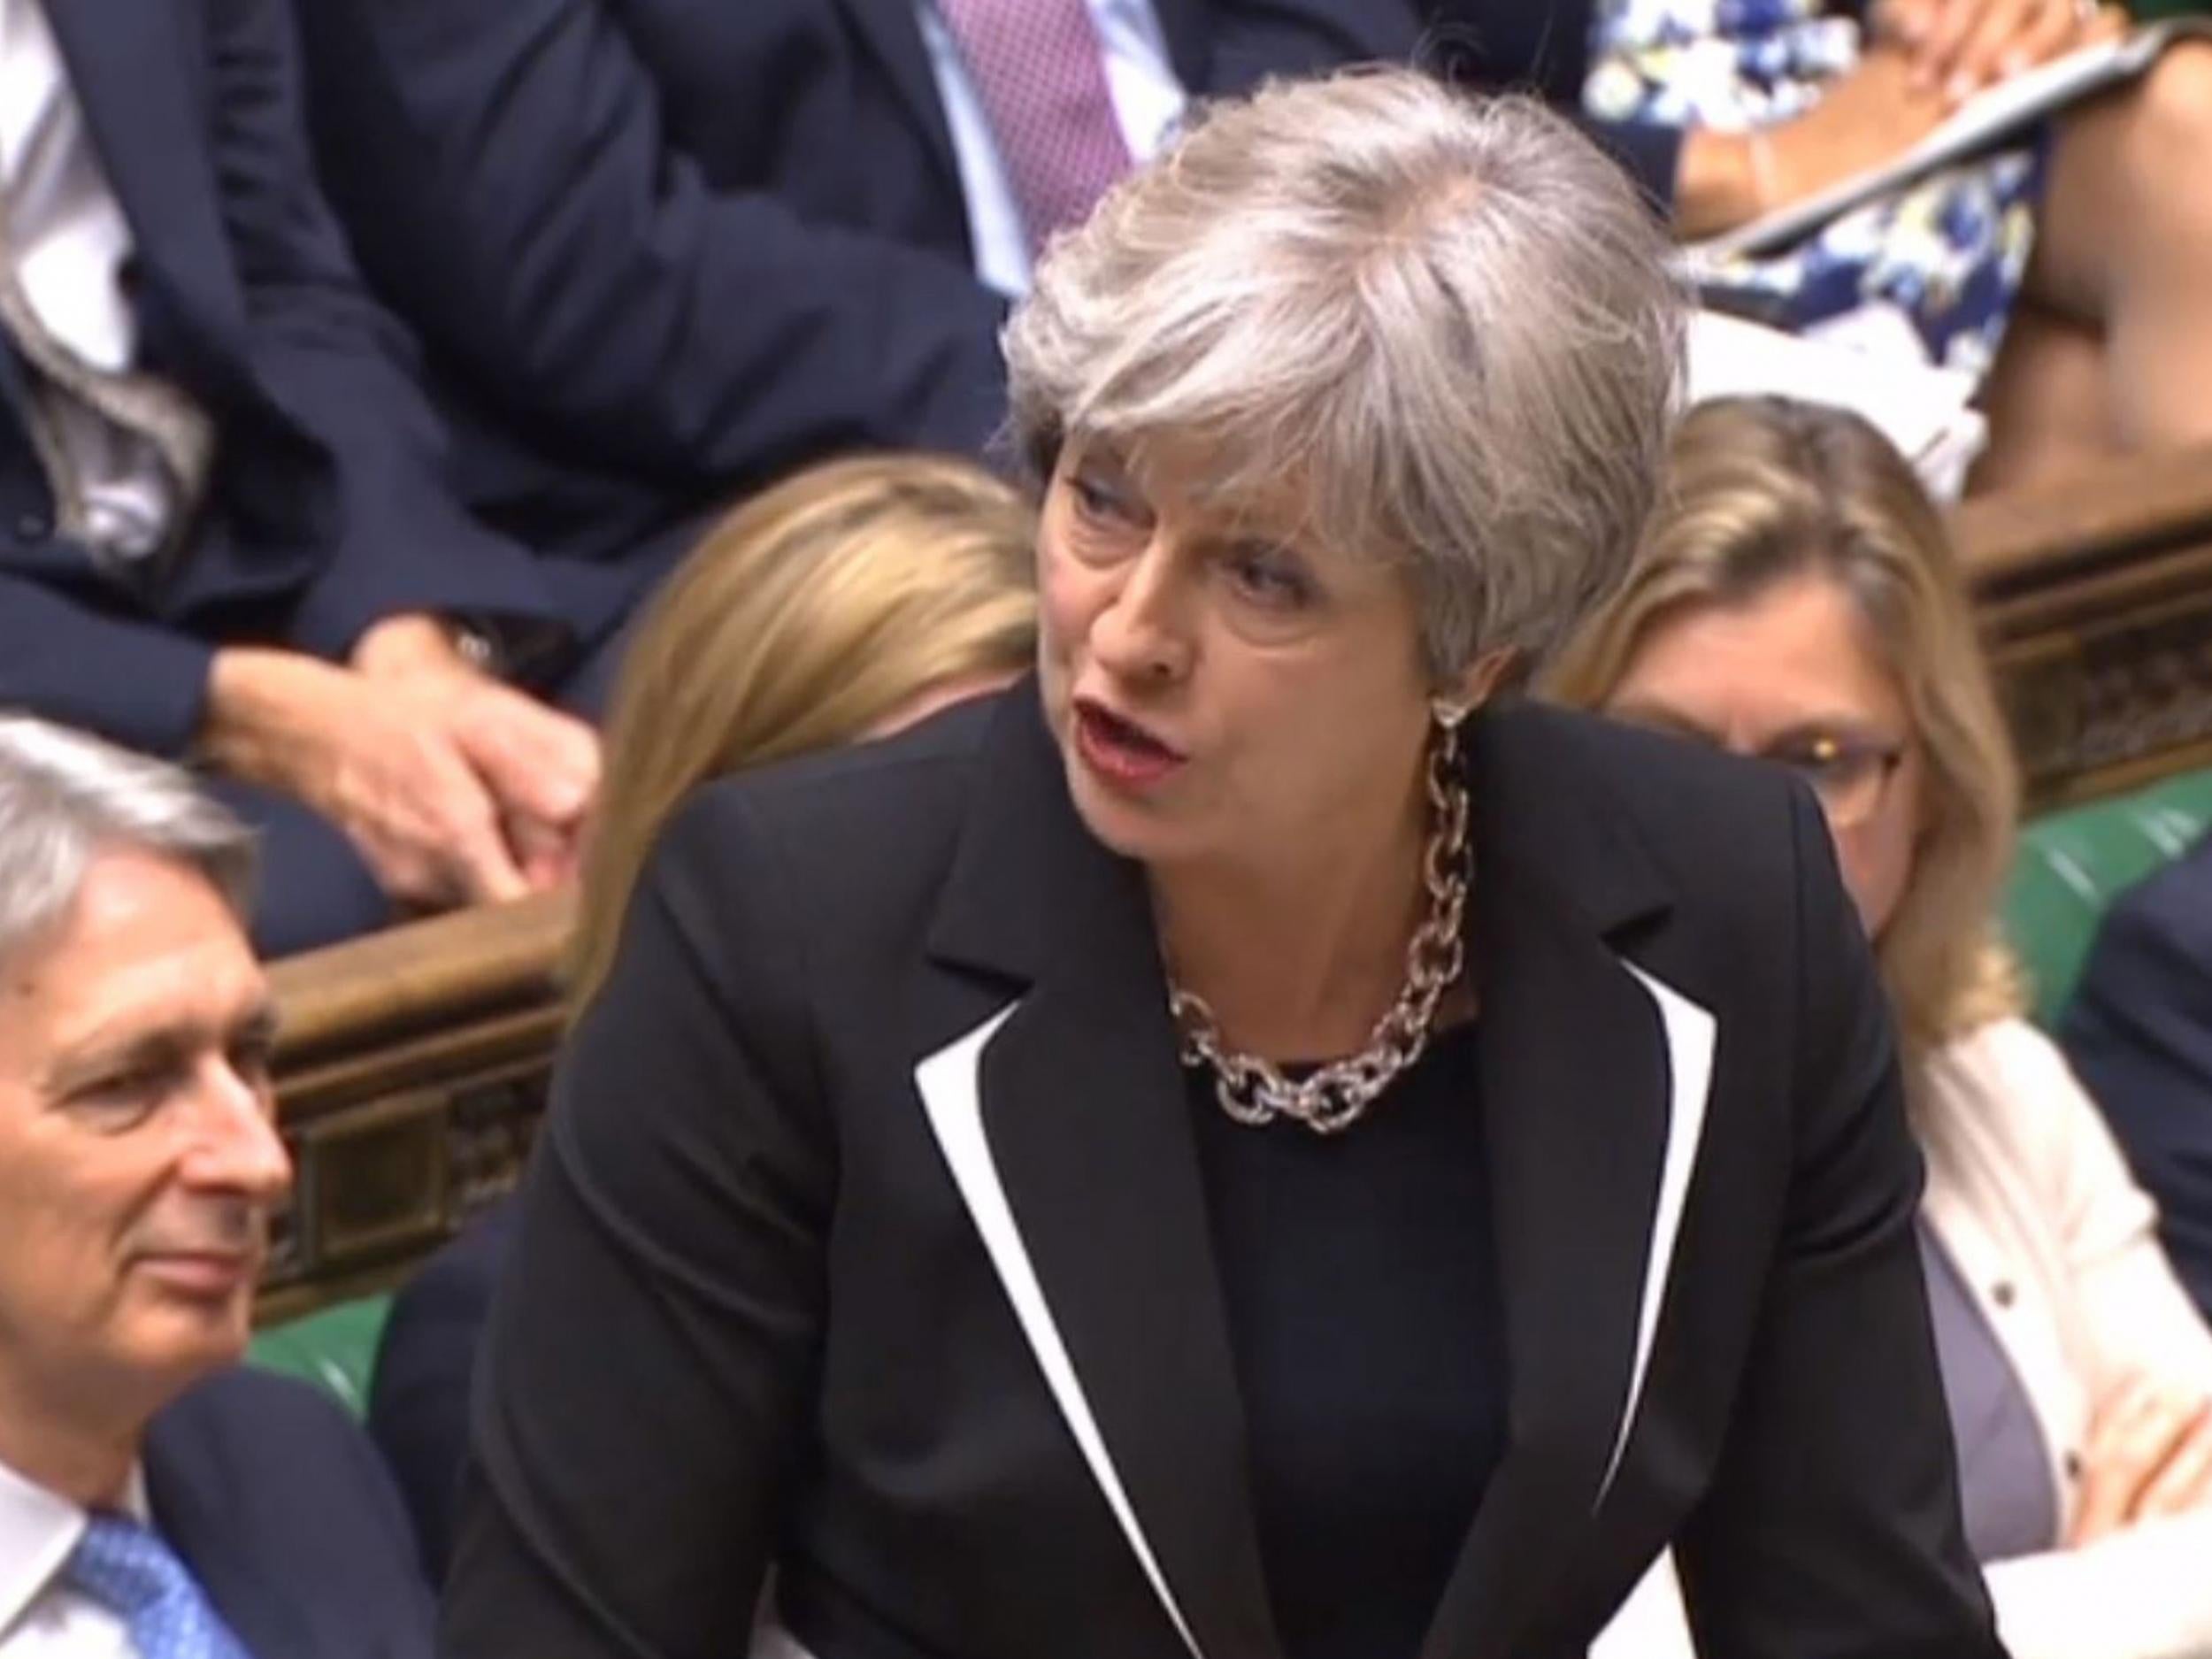 The PM’s departure-date amendment was branded ‘idiotic’